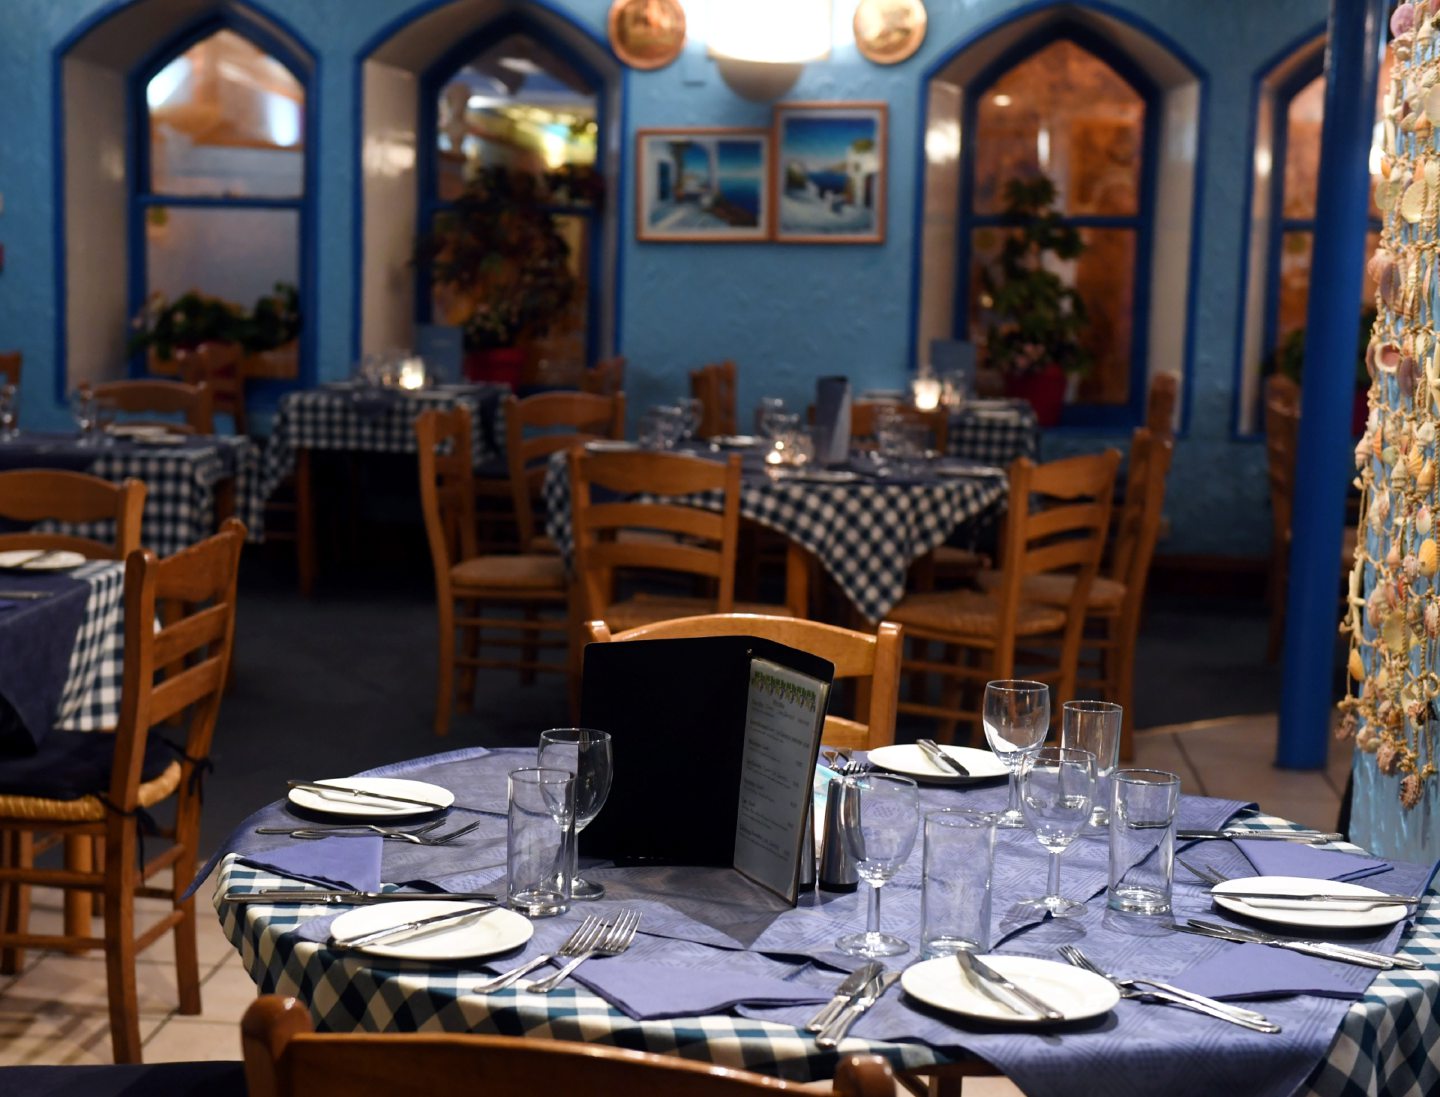 Table set for diners to eat in Christos Greek Taverna